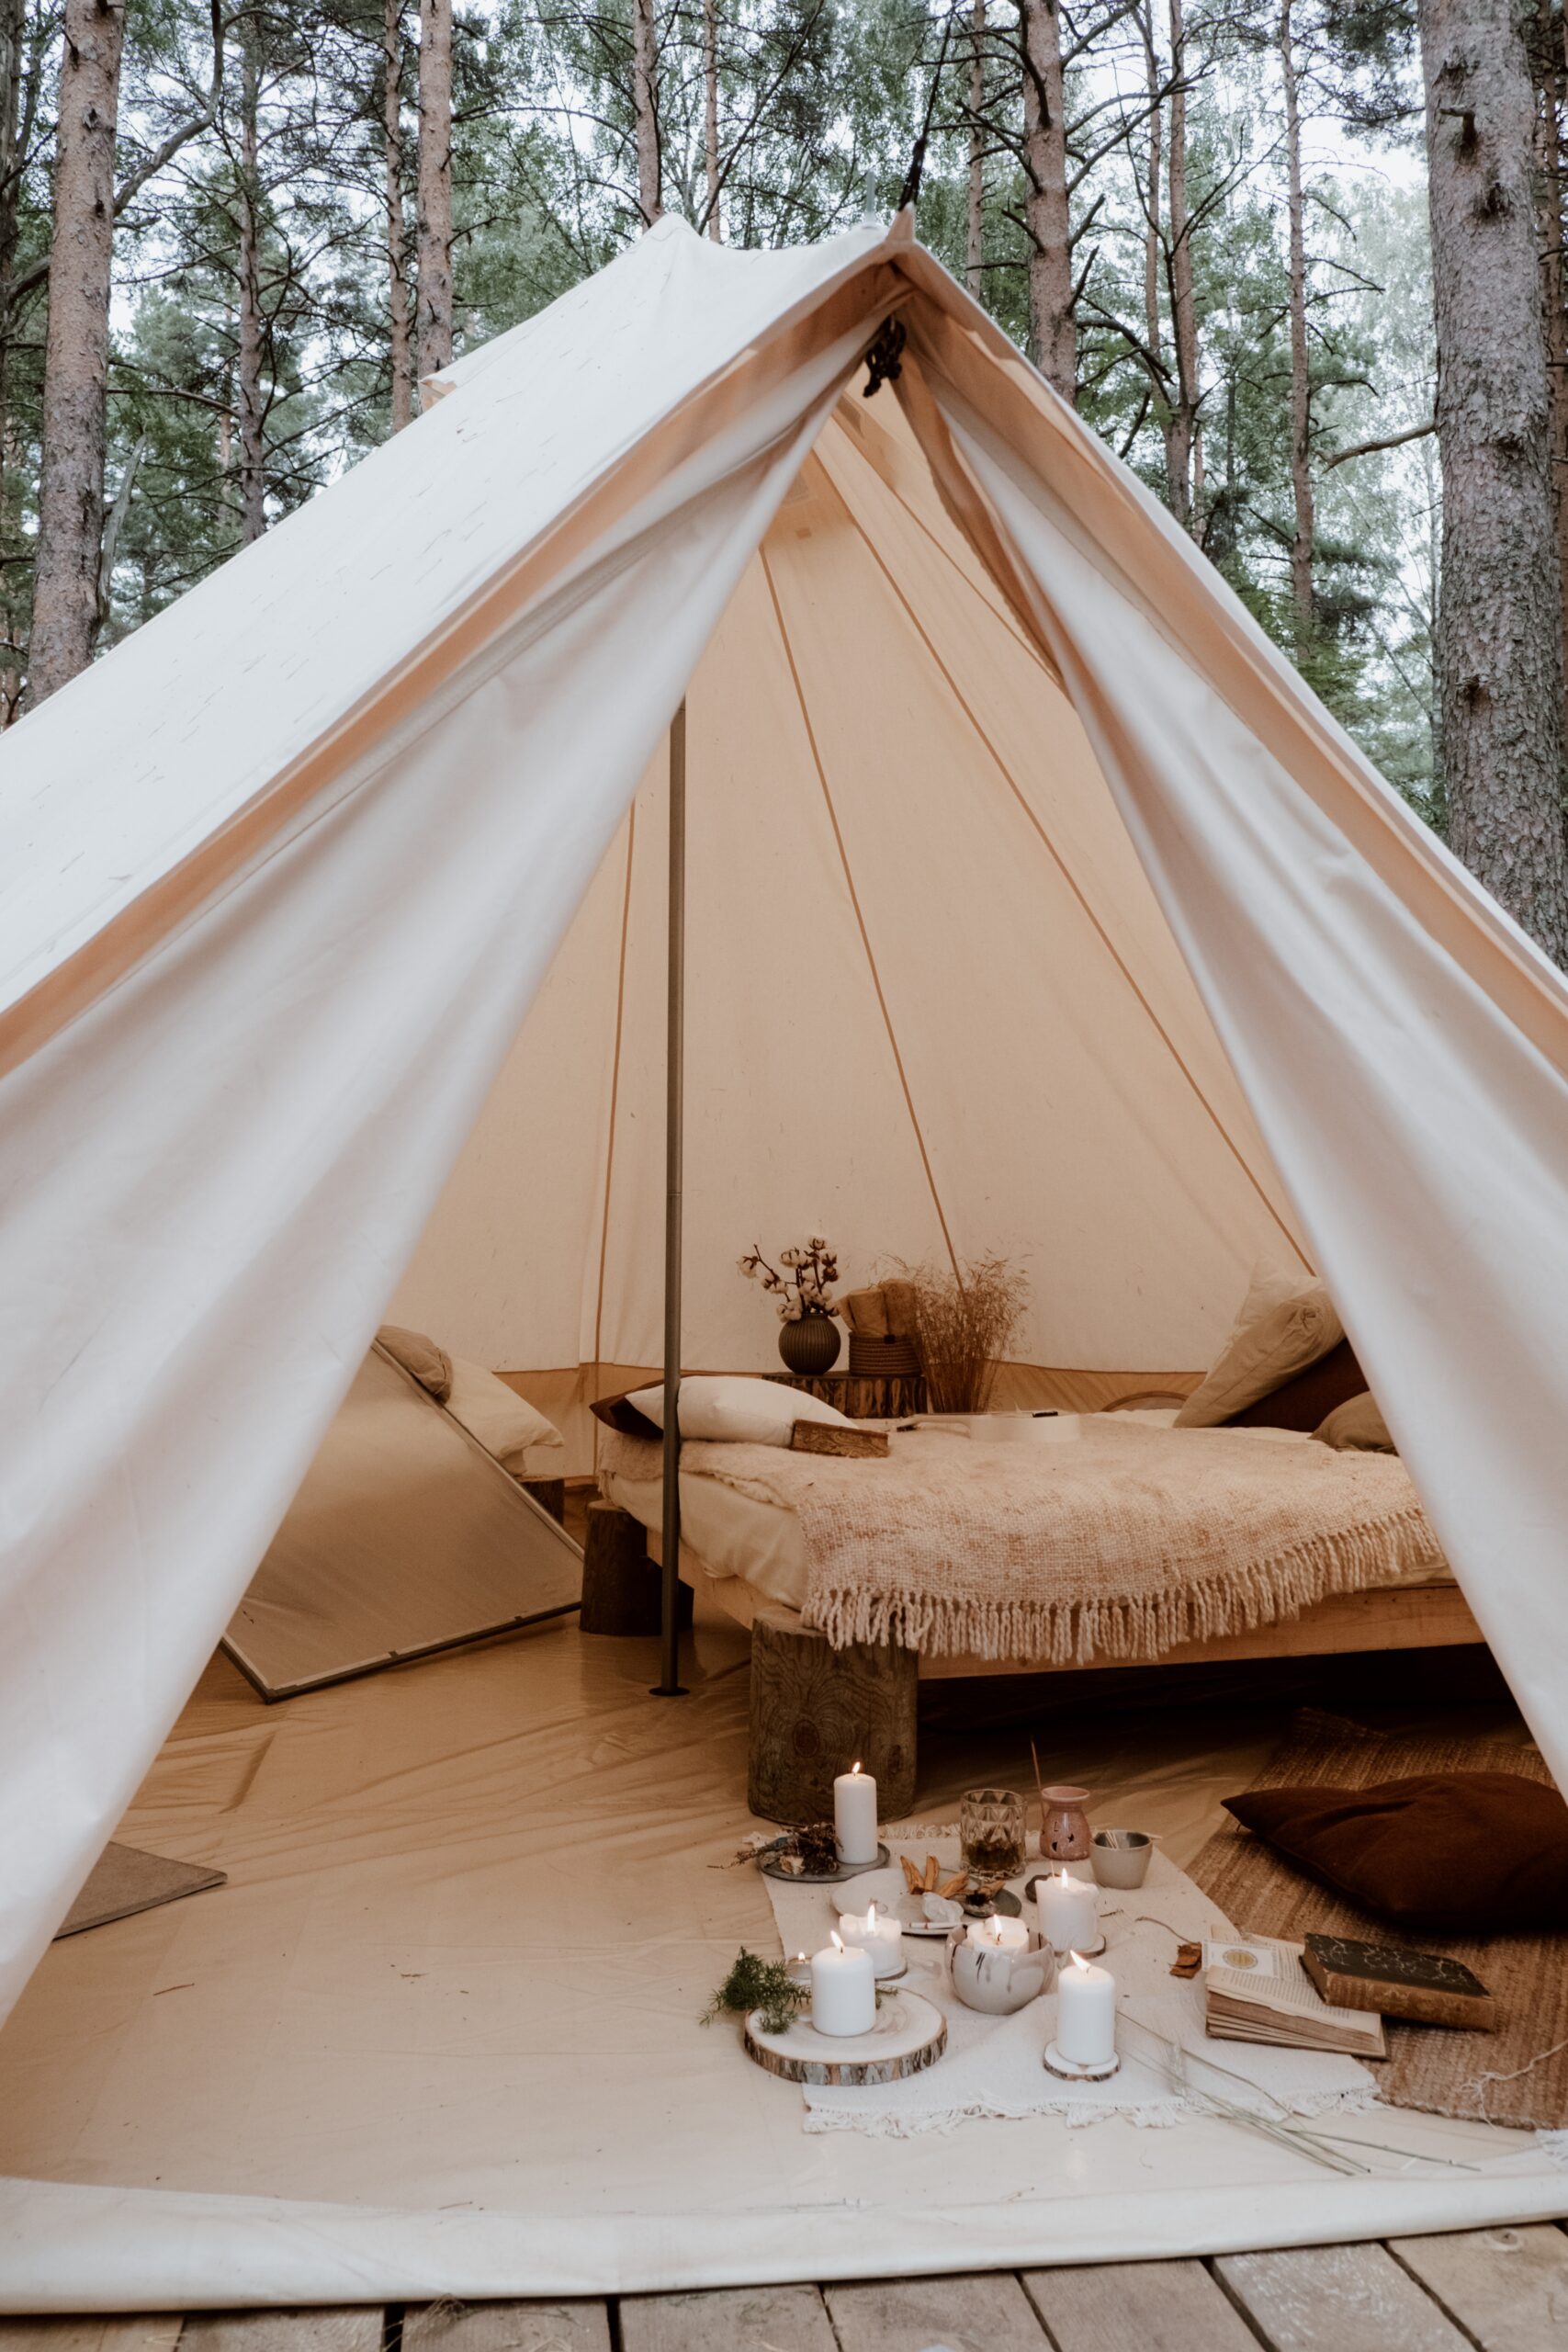 Quick and Creative Ways to Decorate Your Camping Tent